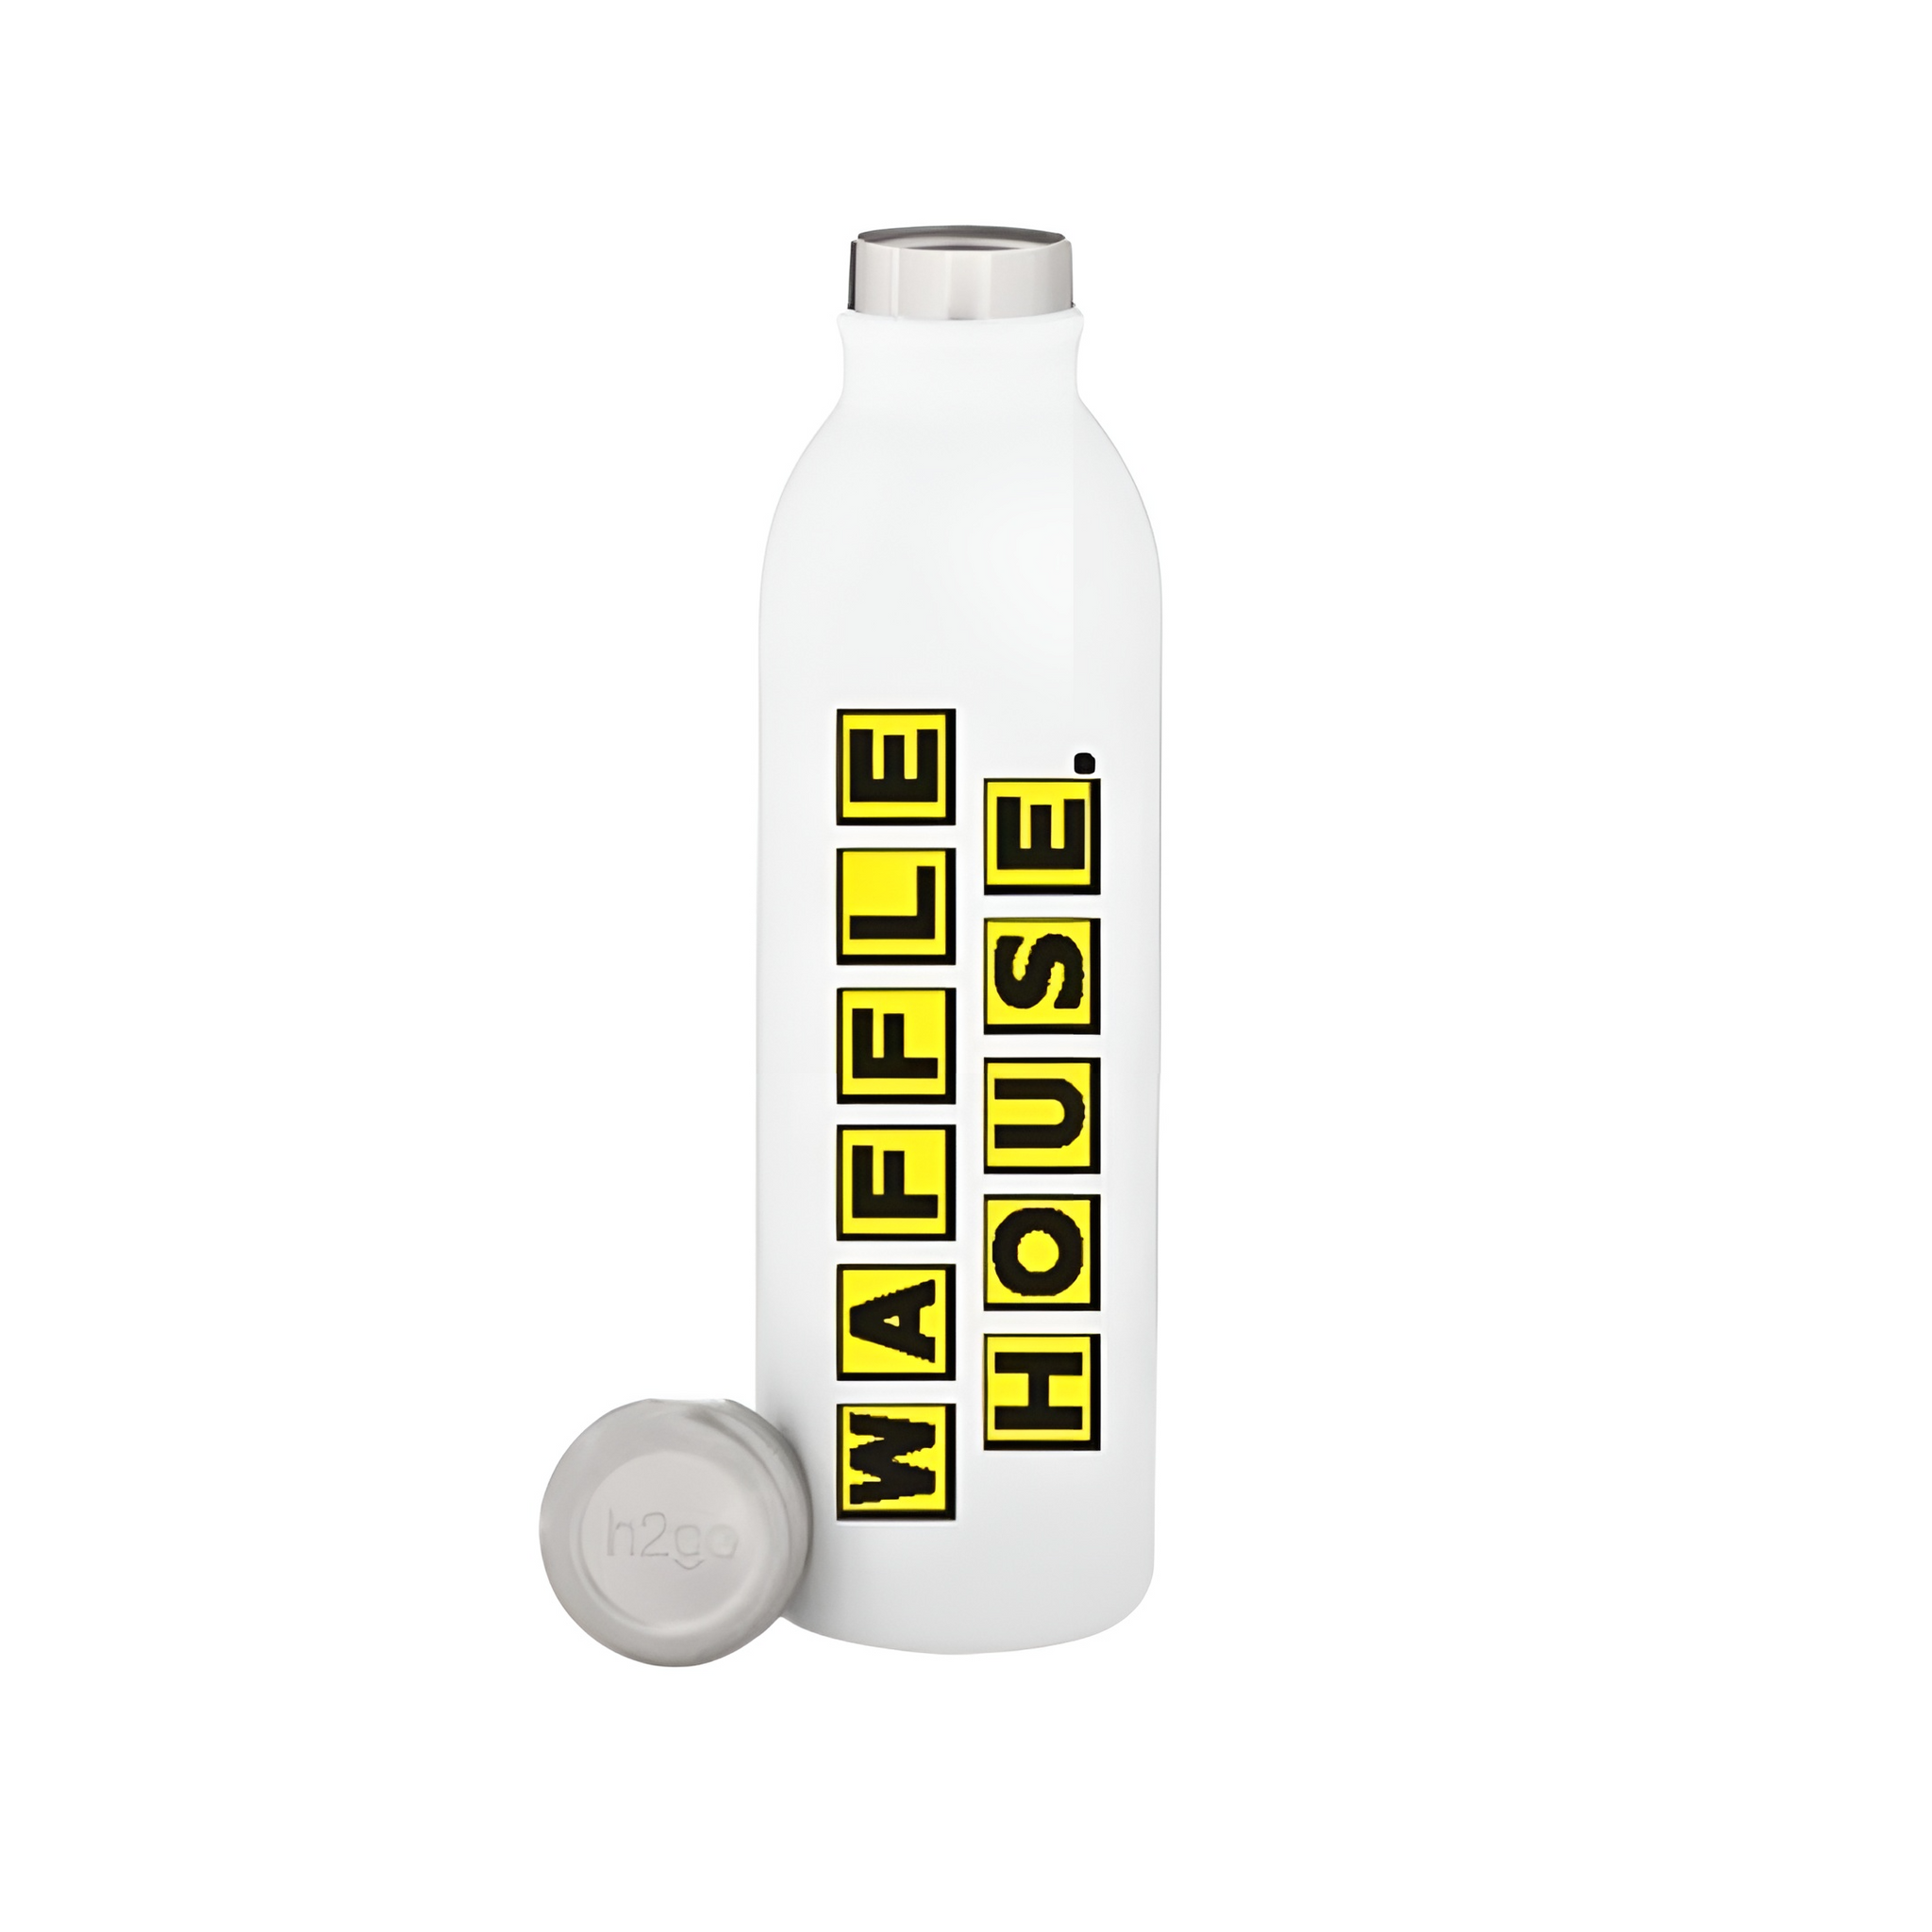 White stainless steel water bottle with yellow and black Waffle House logo